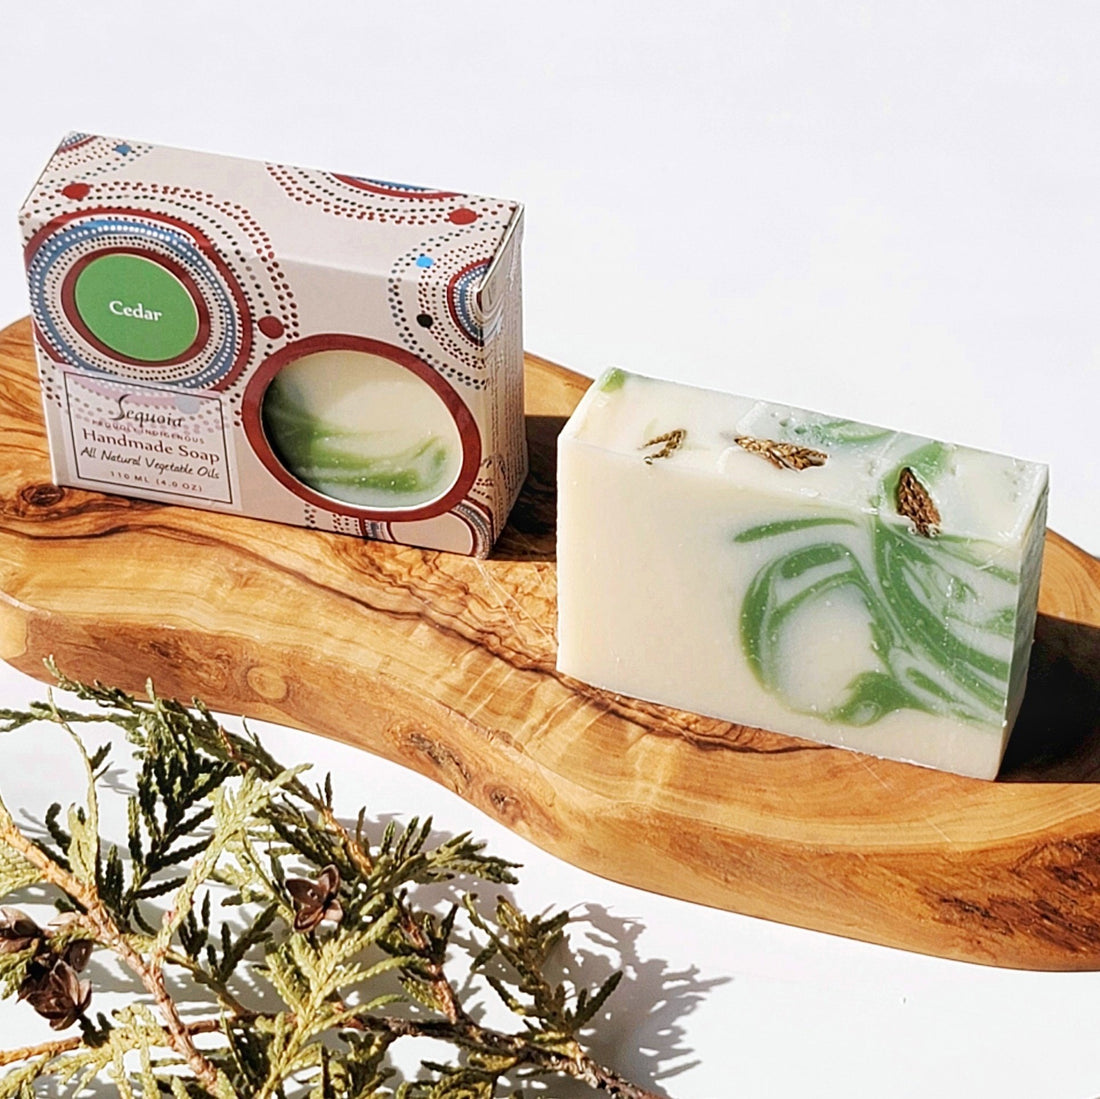 Indigenous-Made Soaps